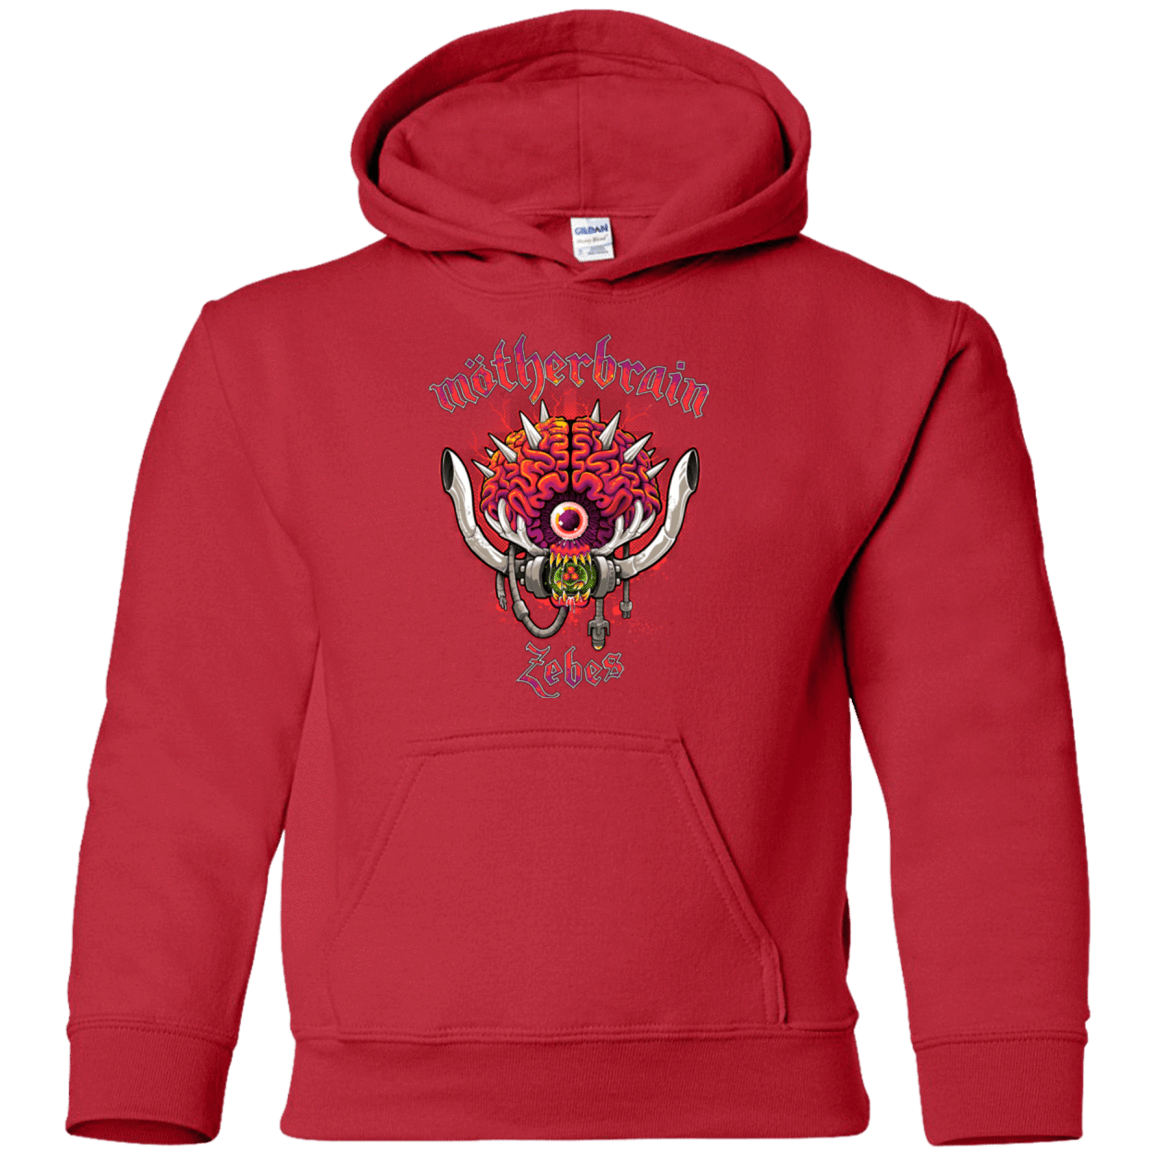 Sweatshirts Red / YS Live From Zebes Youth Hoodie